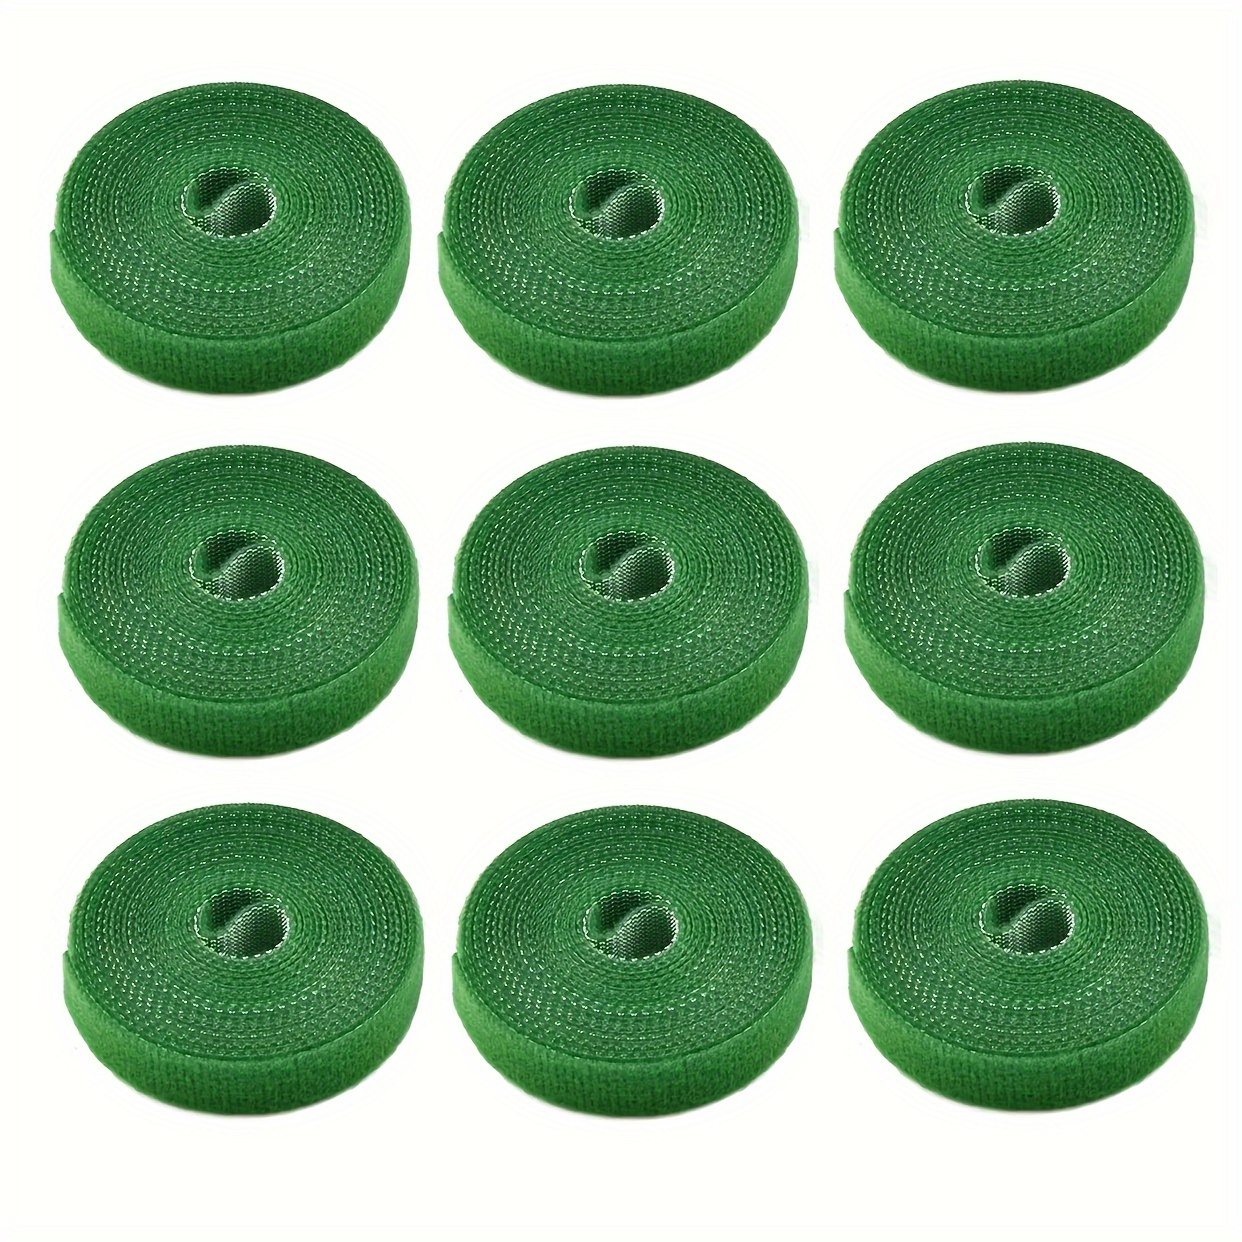 

9 Rolls Green Garden Plant Ties, Plastic 10mm Wide, 1 Meter Long Twine For Climbing Plants, Gardening Support Tape For Branch Fixing And Flower Arranging